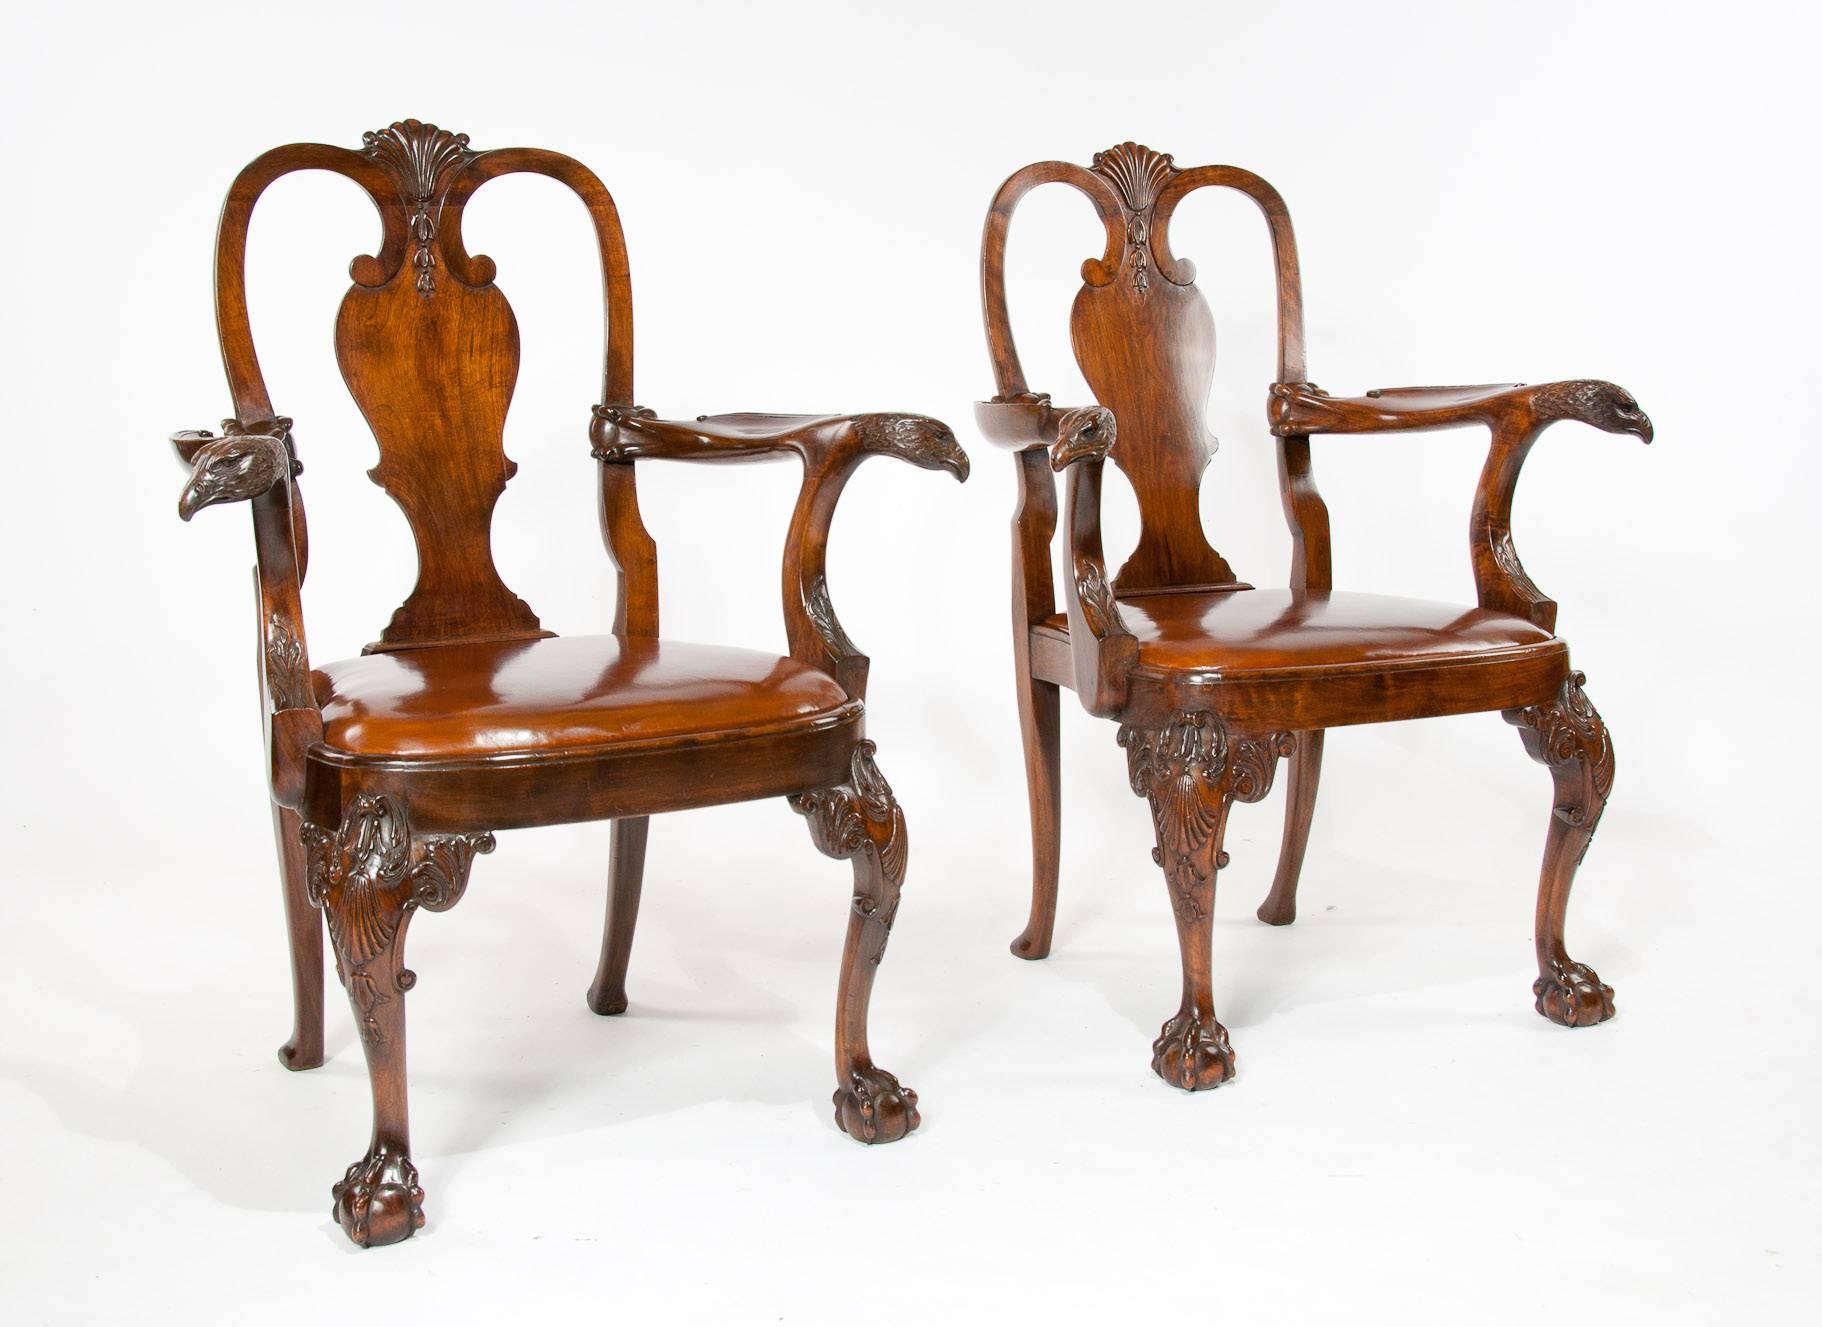 An extremely good pair of antique walnut desk armchairs with leather seats. 
A fine example of a excellent craftsmanship from the 1900s these chairs have been designed to be on display as well as being a practical pair of chairs which would have